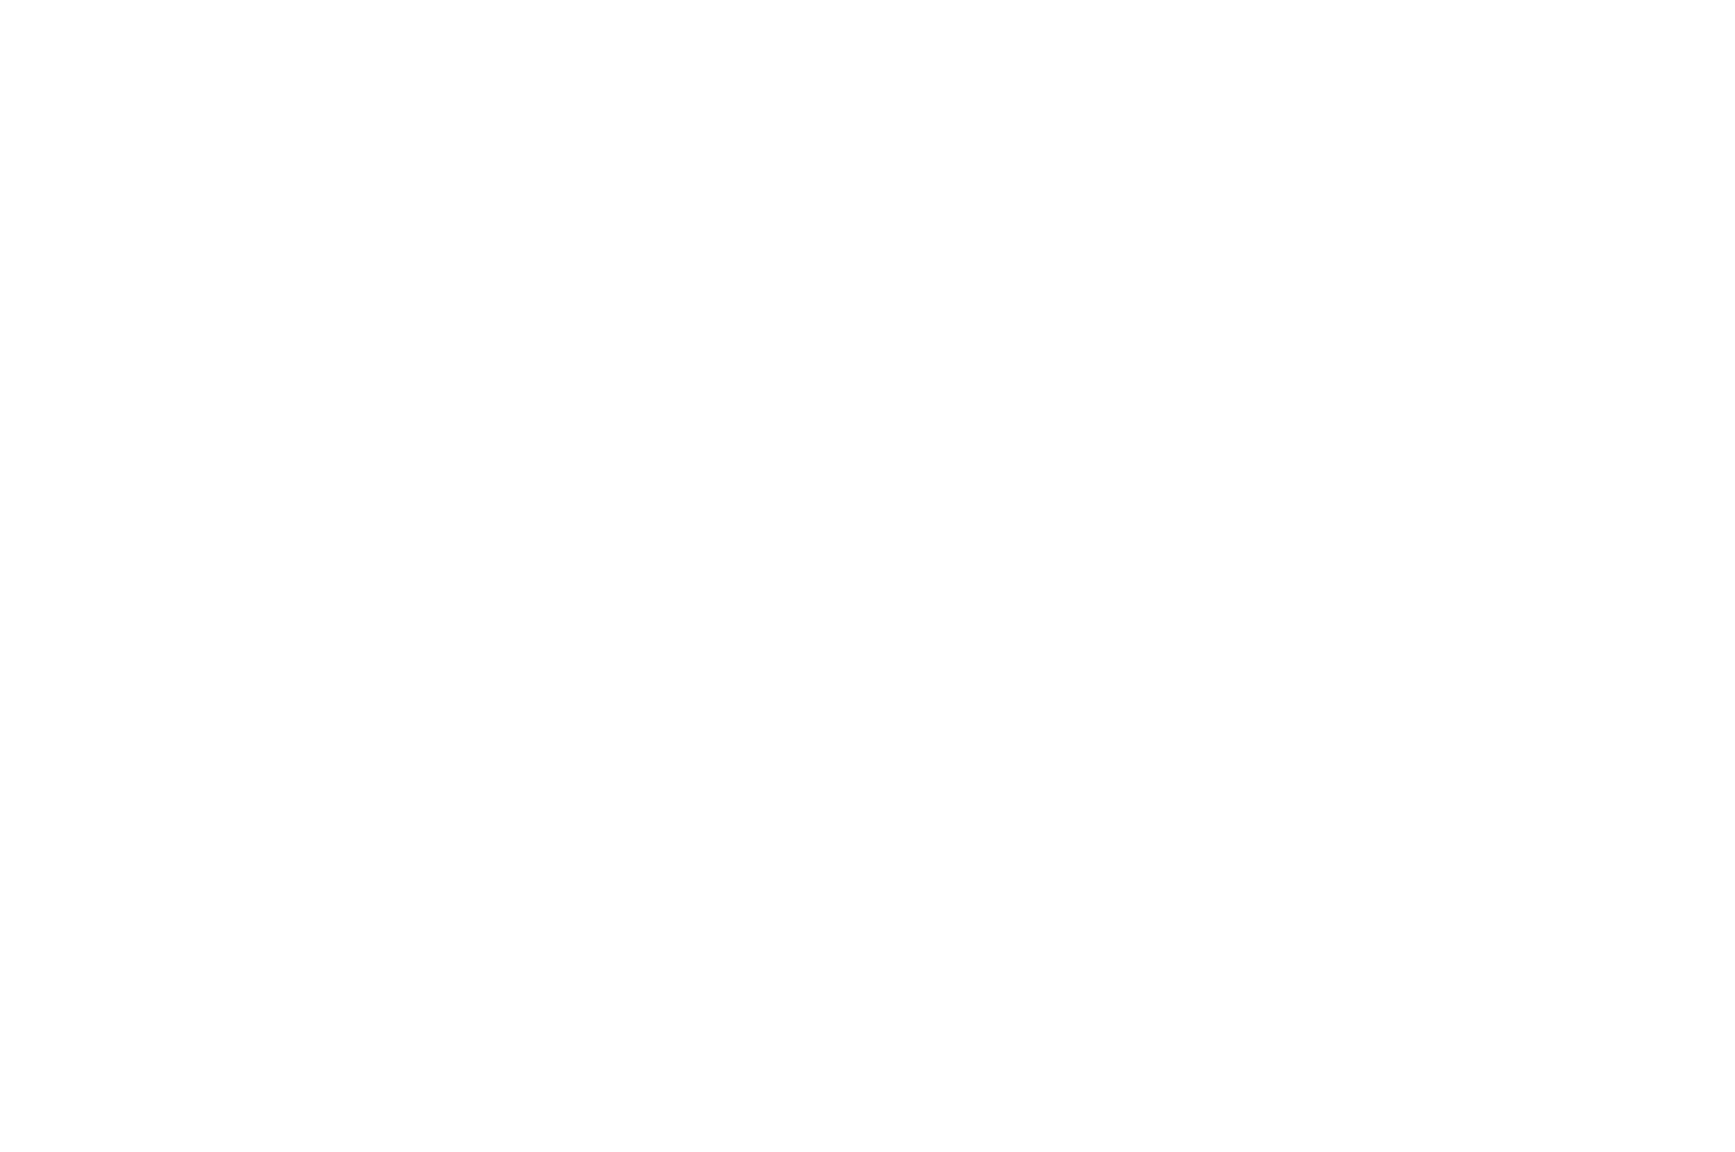 Best Documentary Storytelling - Content Film Festival and Media Summit - 2021